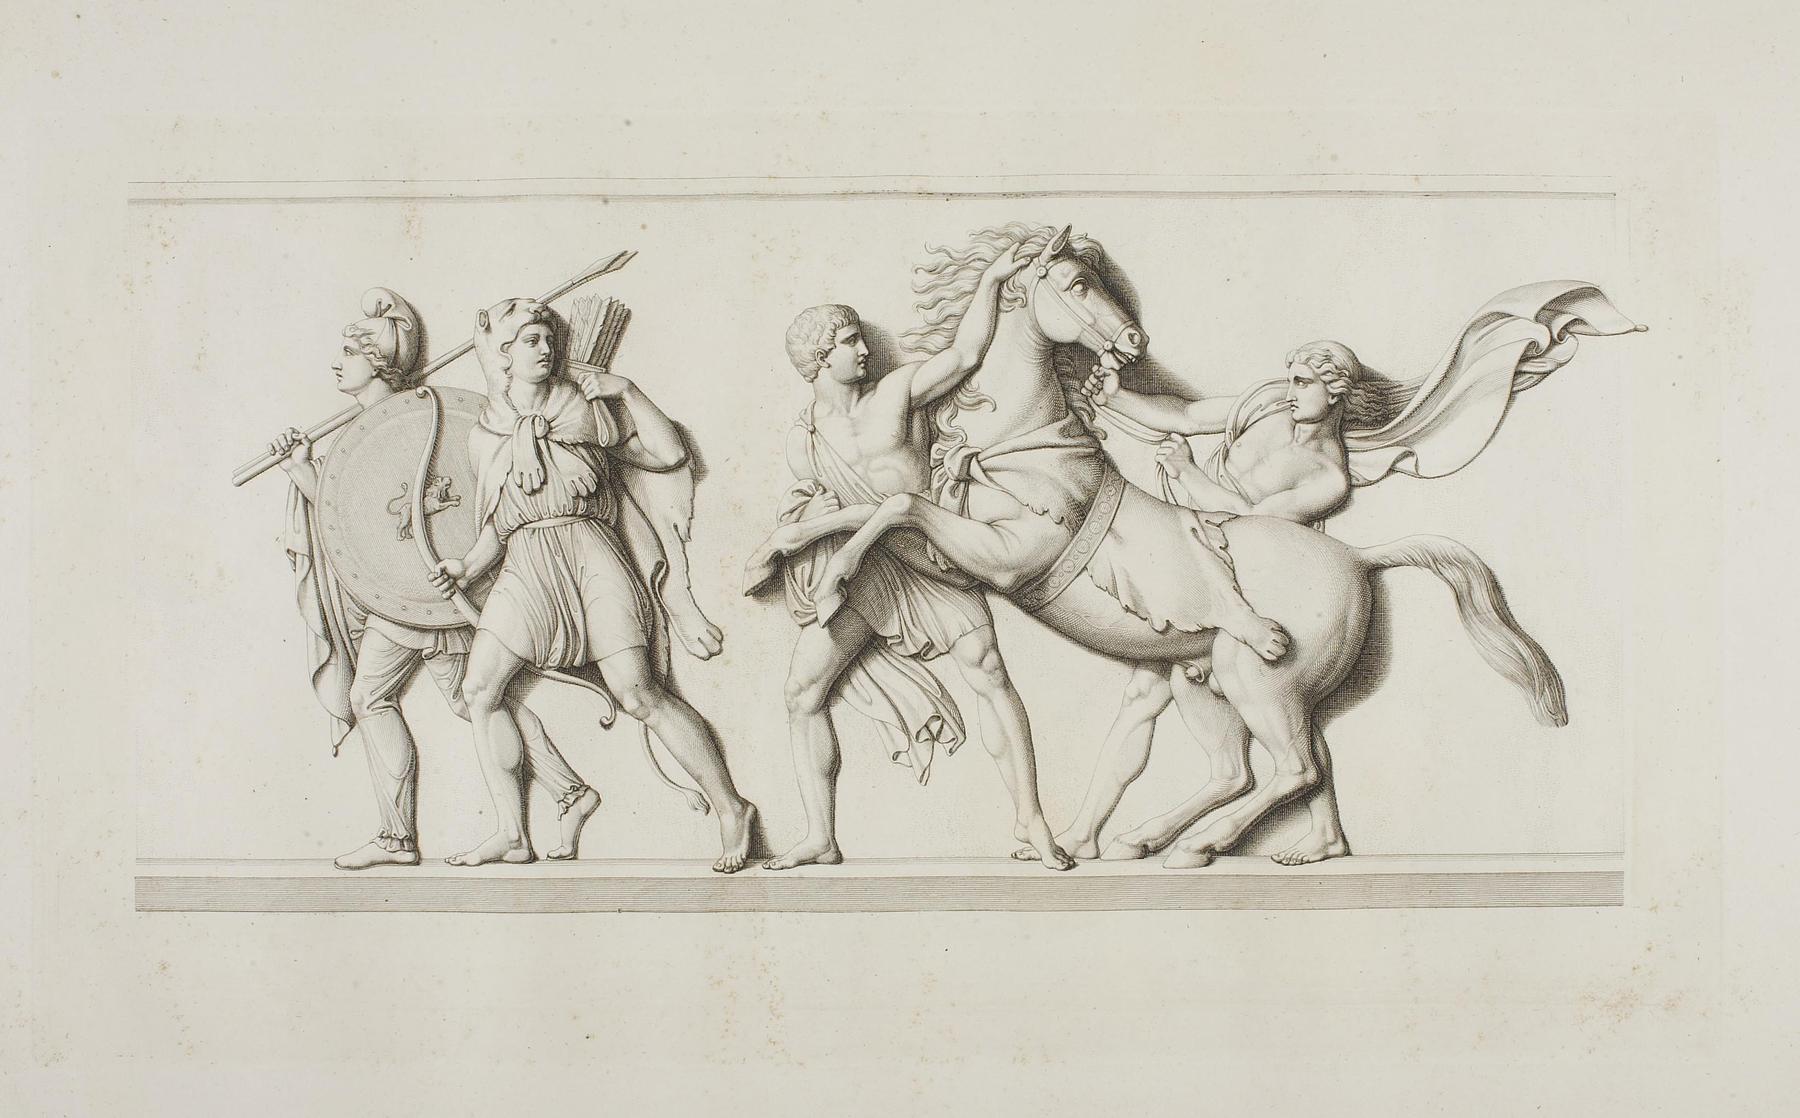 Alexander the Great's Armour Bearers and Bucephalus, E36k